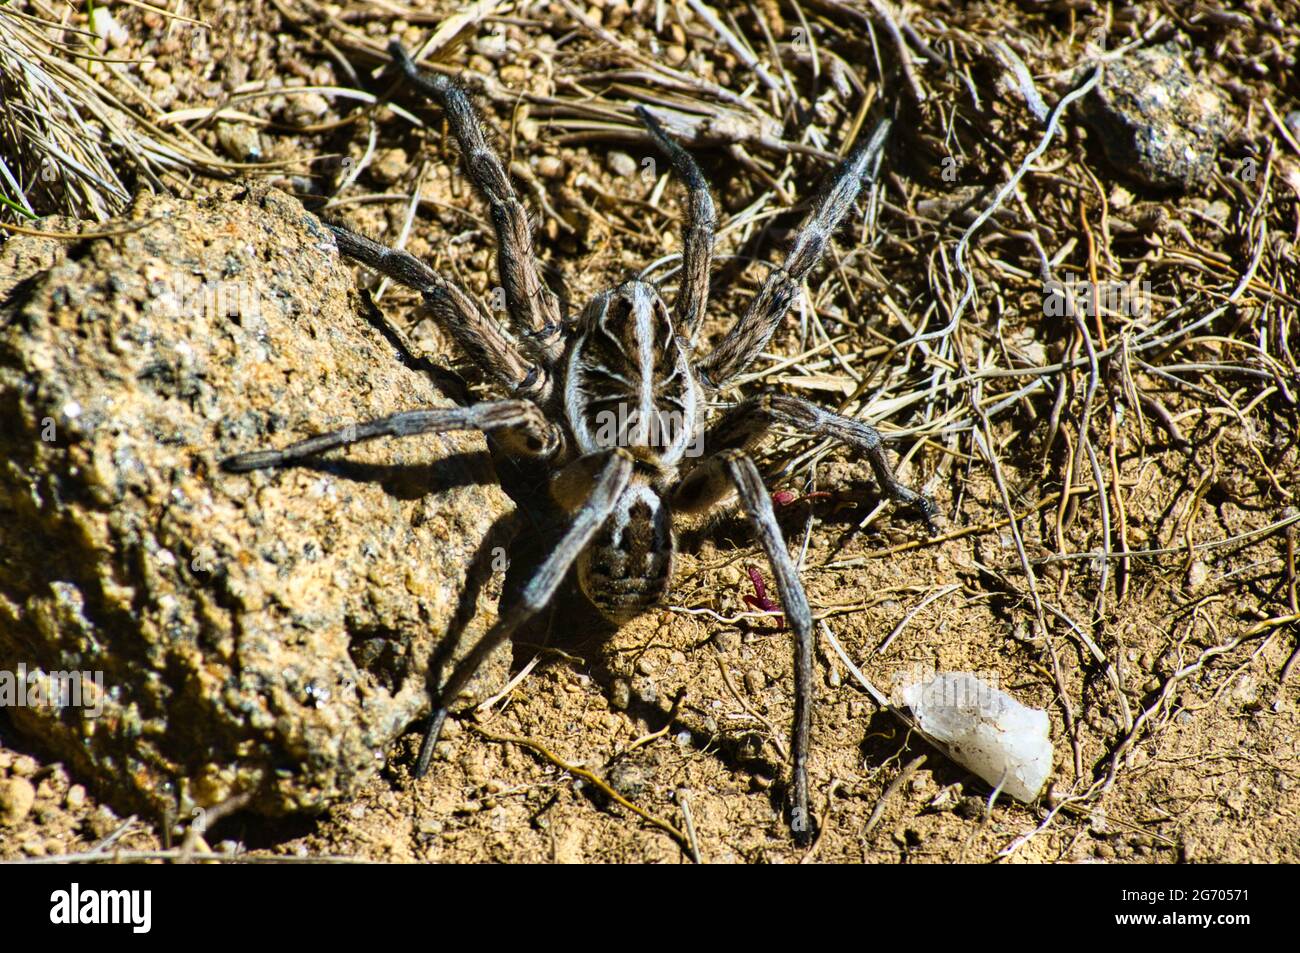 A ground-dwelling Australian wolf spider (Lycosidae) in its natural habitat: the dry, mountainous Bogong Plains in the Australian Alps. Stock Photo